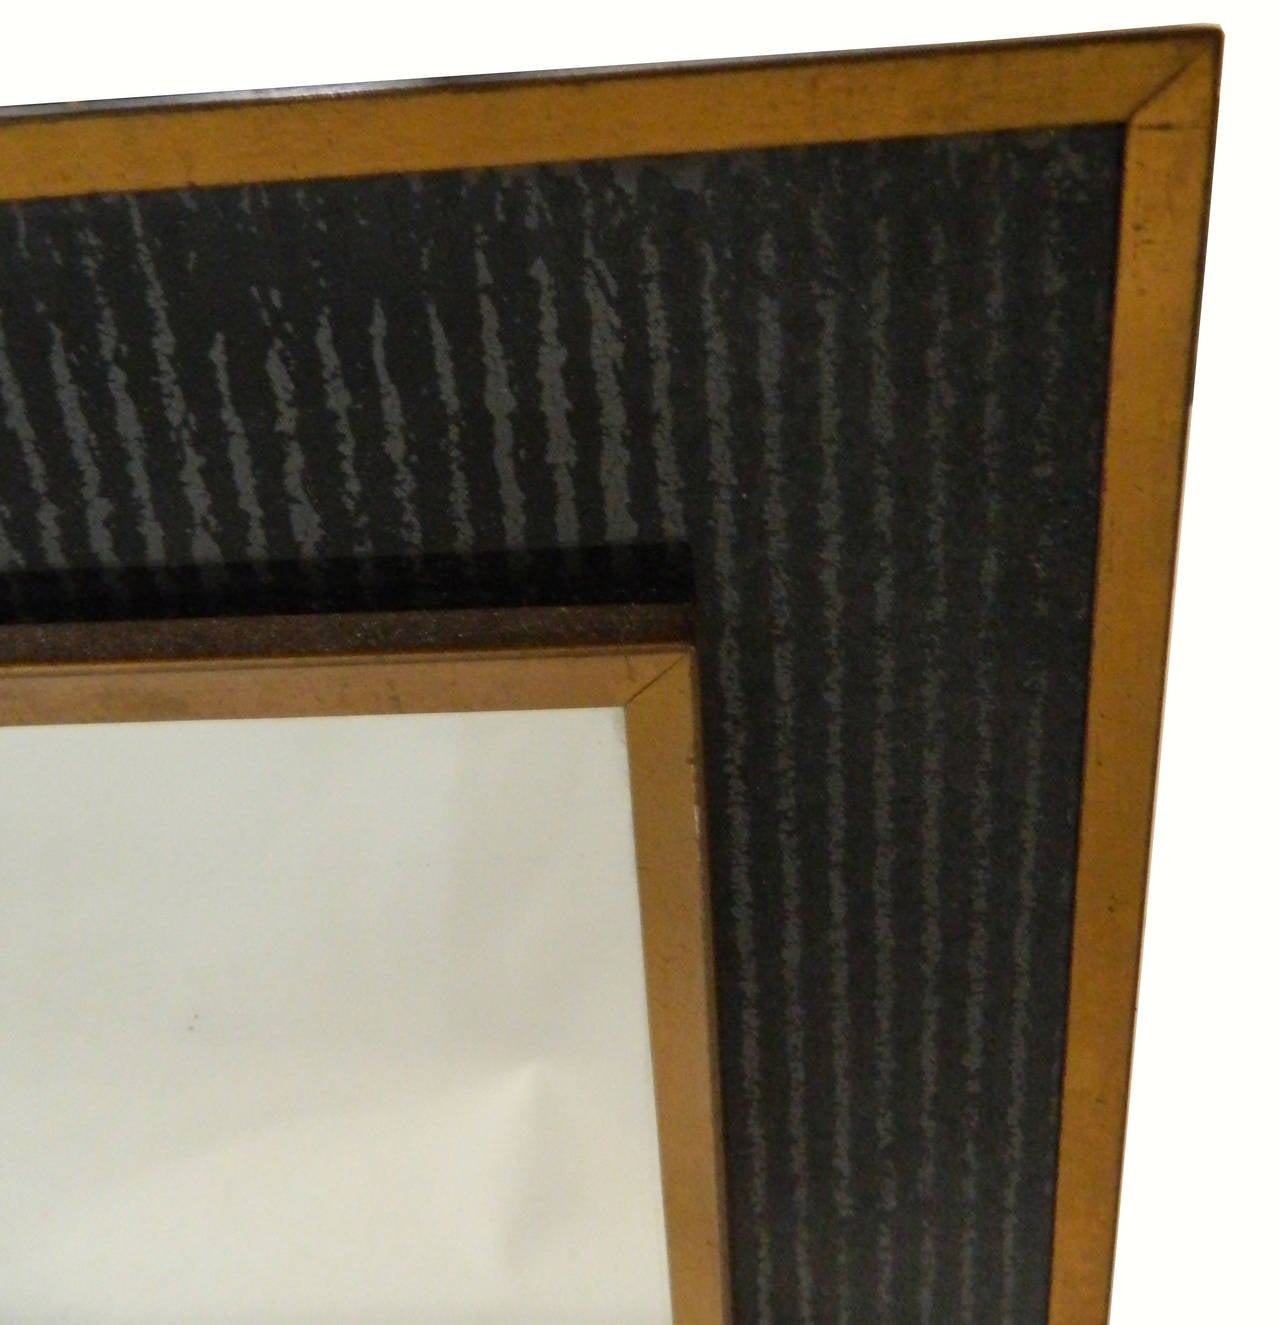 Small mirror in the style of Jacques Adnet, brass and black opaline frame.
Mirror measures: 19.5